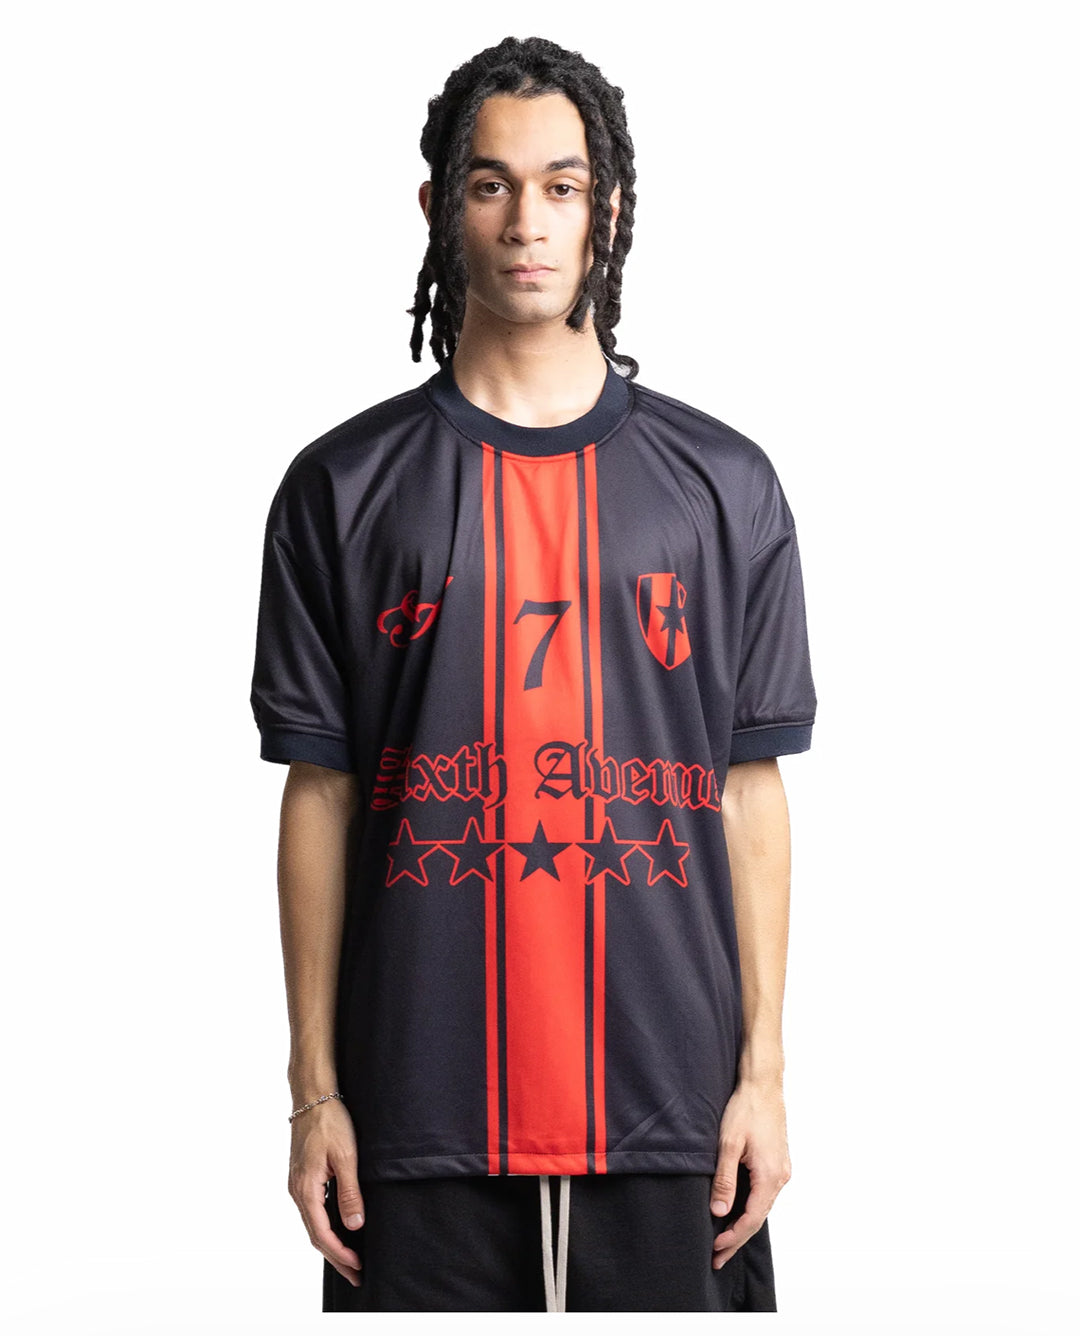 THE WORLD IS YOURS - REVERSIBLE SOCCER JERSEY